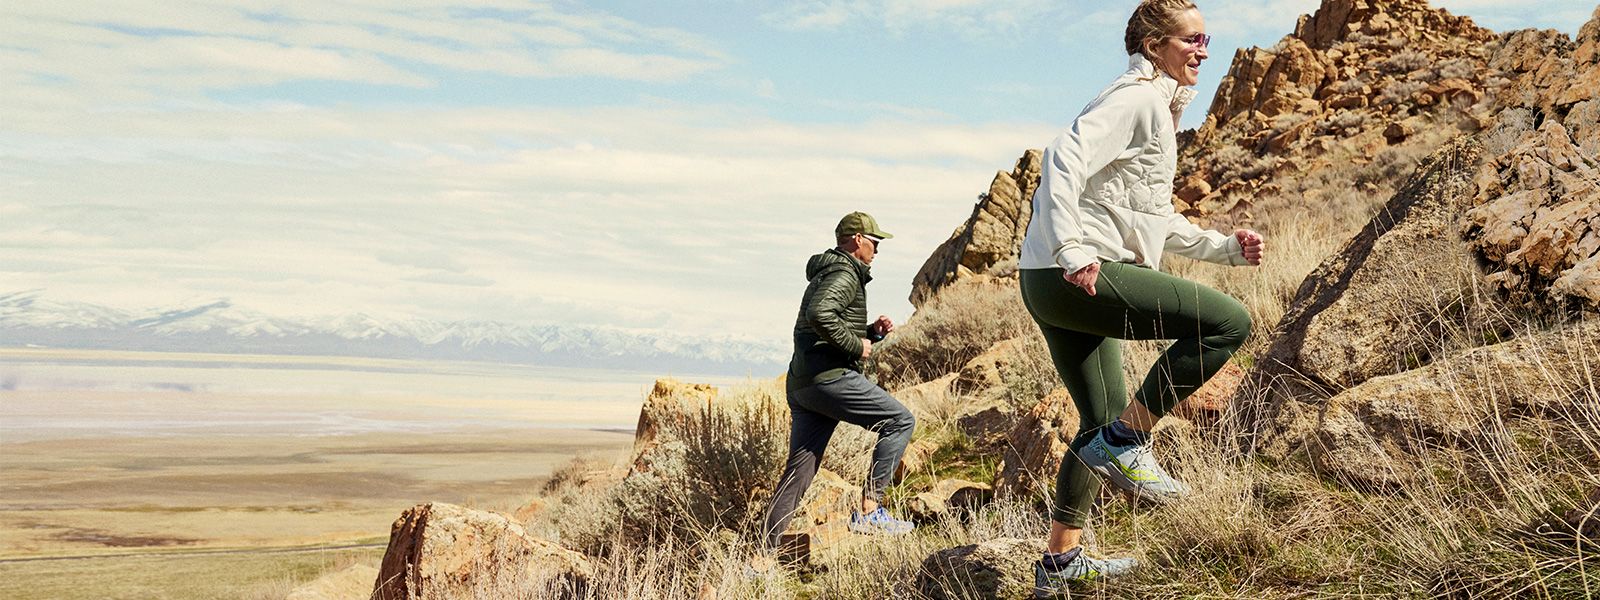 A group of people running on a rocky hill wearing Saucony gear.